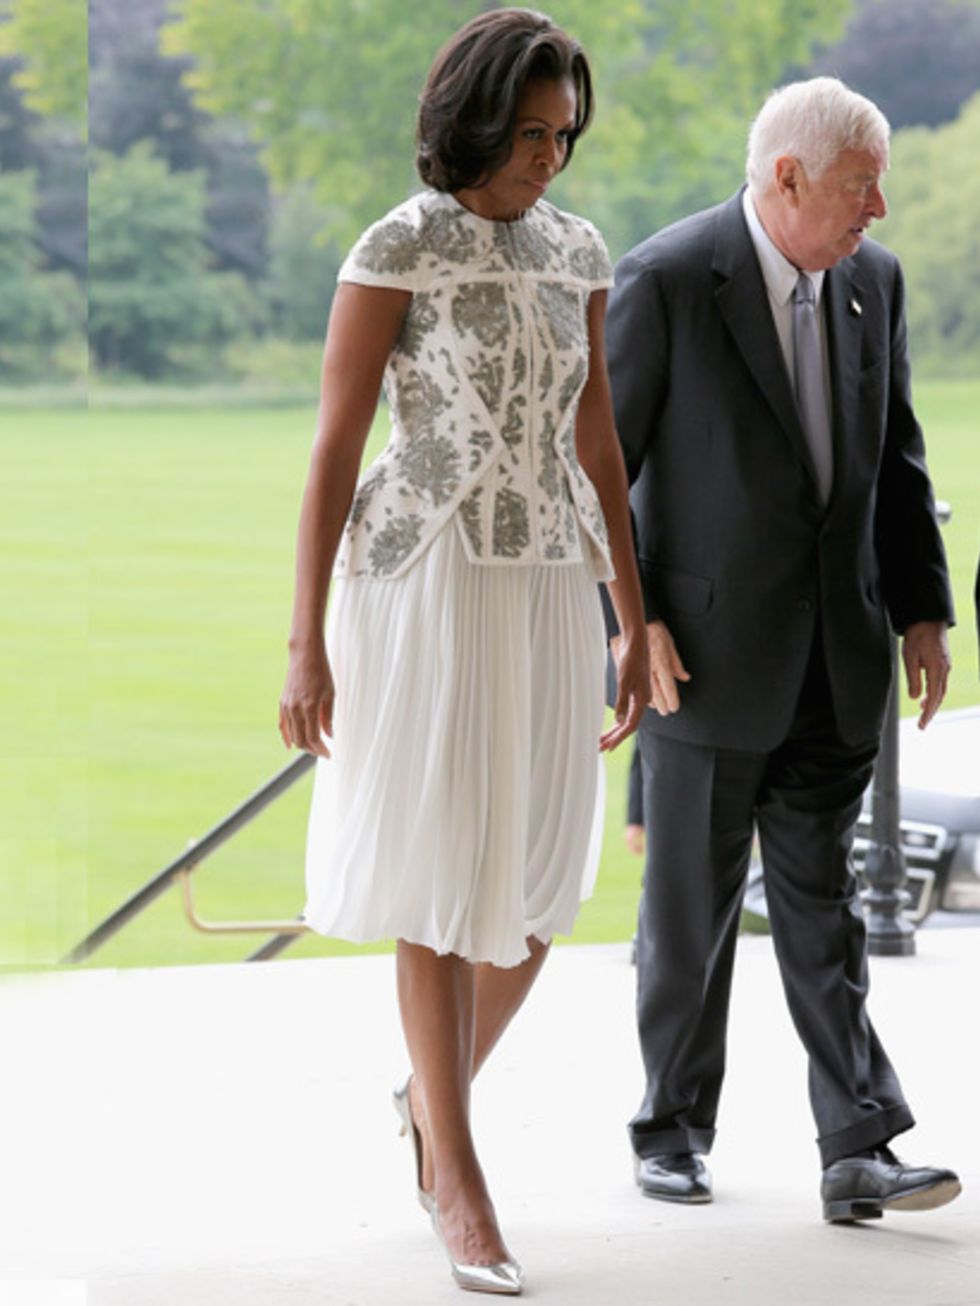 <p>Michelle Obama arrives at the Buckingham Palace reception wearing US designer J. Mendel Resort 2012 before the Opening Ceremony</p>